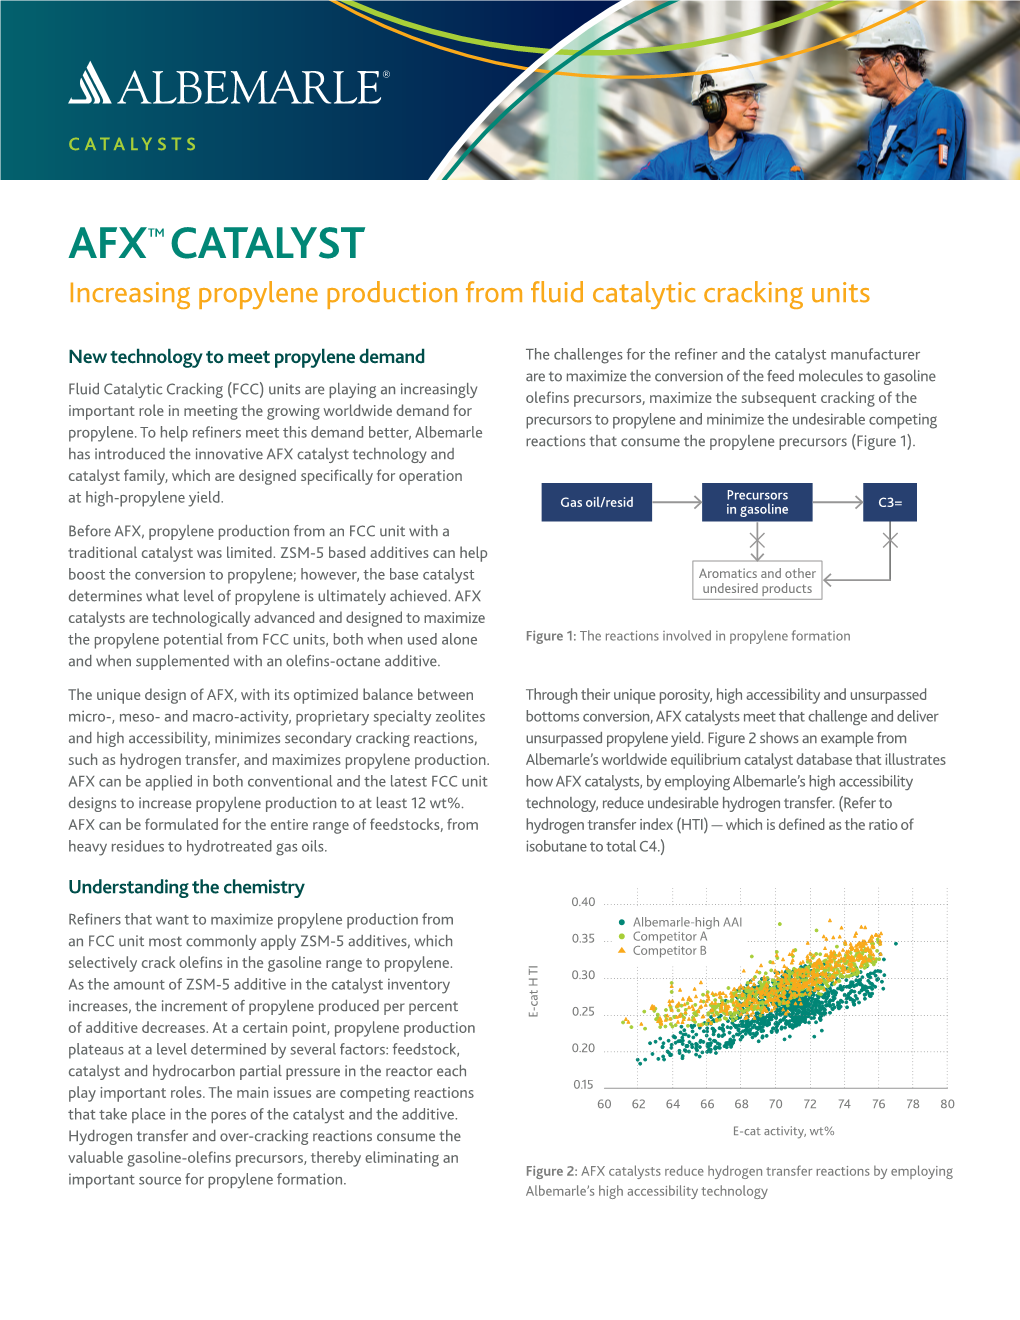 AFXTM CATALYST Increasing Propylene Production from Fluid Catalytic Cracking Units